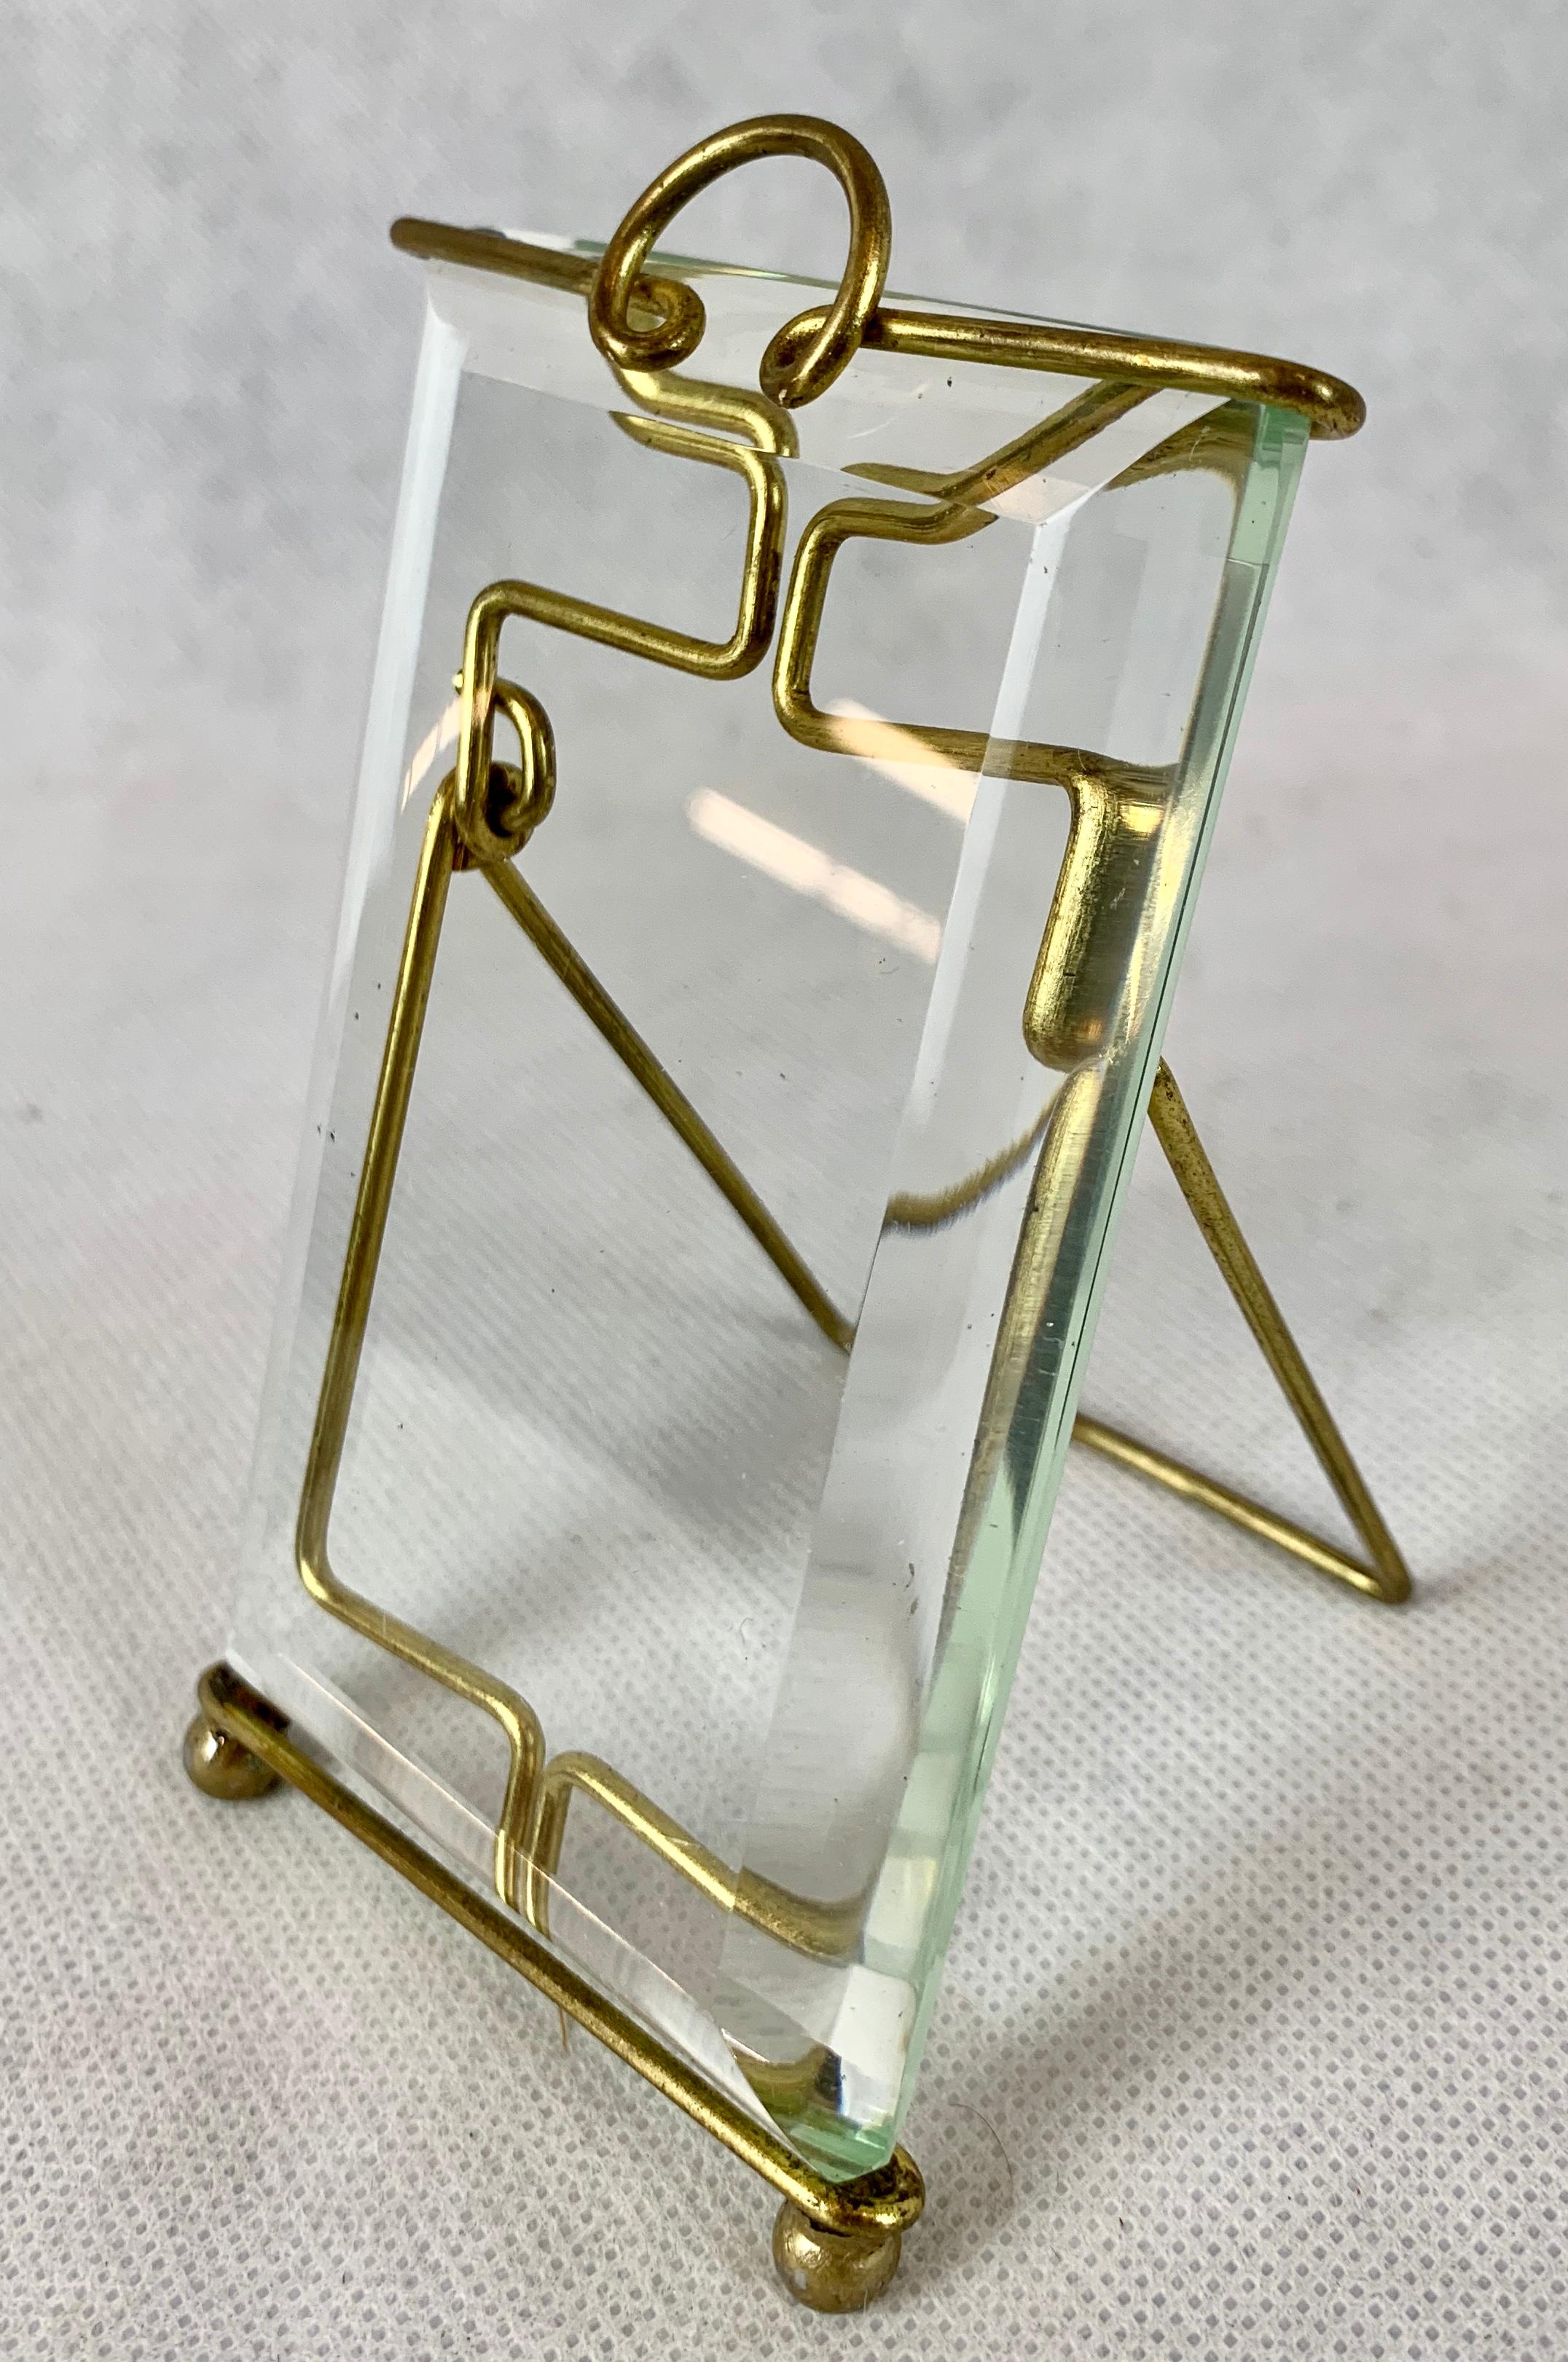 Late 19th century unusual brass and beveled glass photo frame. The thick piece of glass is easily removed by pulling up on the wire. The brass wire by itself creates an interesting image. The frame rests on two brass ball feet. You place the photo